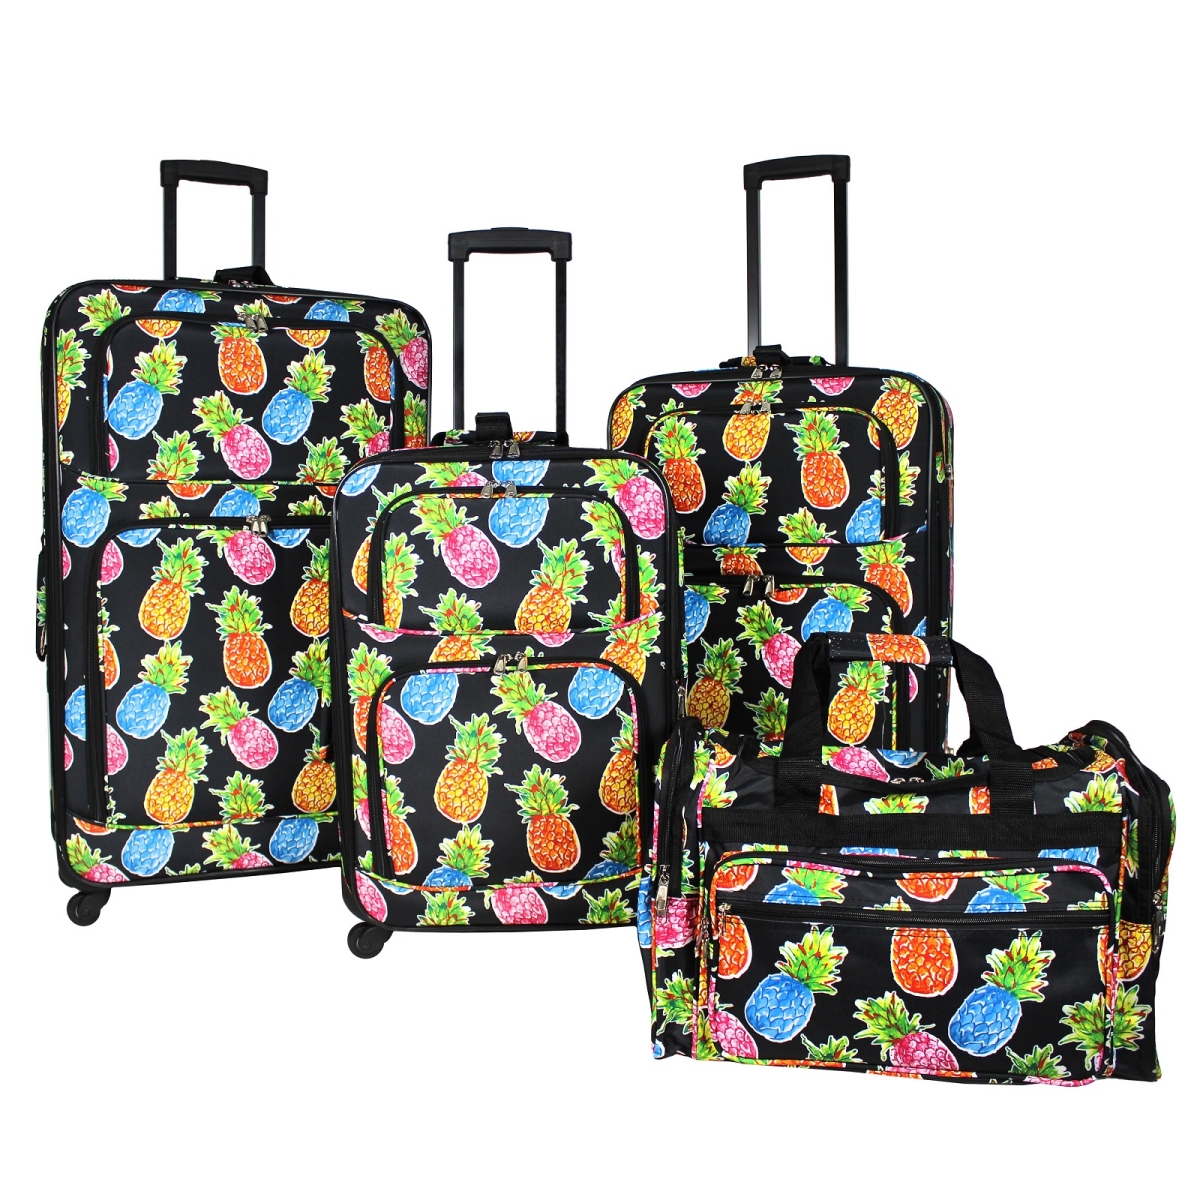 818703-t19-239 Rolling Expandable Spinner Luggage Set, Pineapple Black - 4 Piece